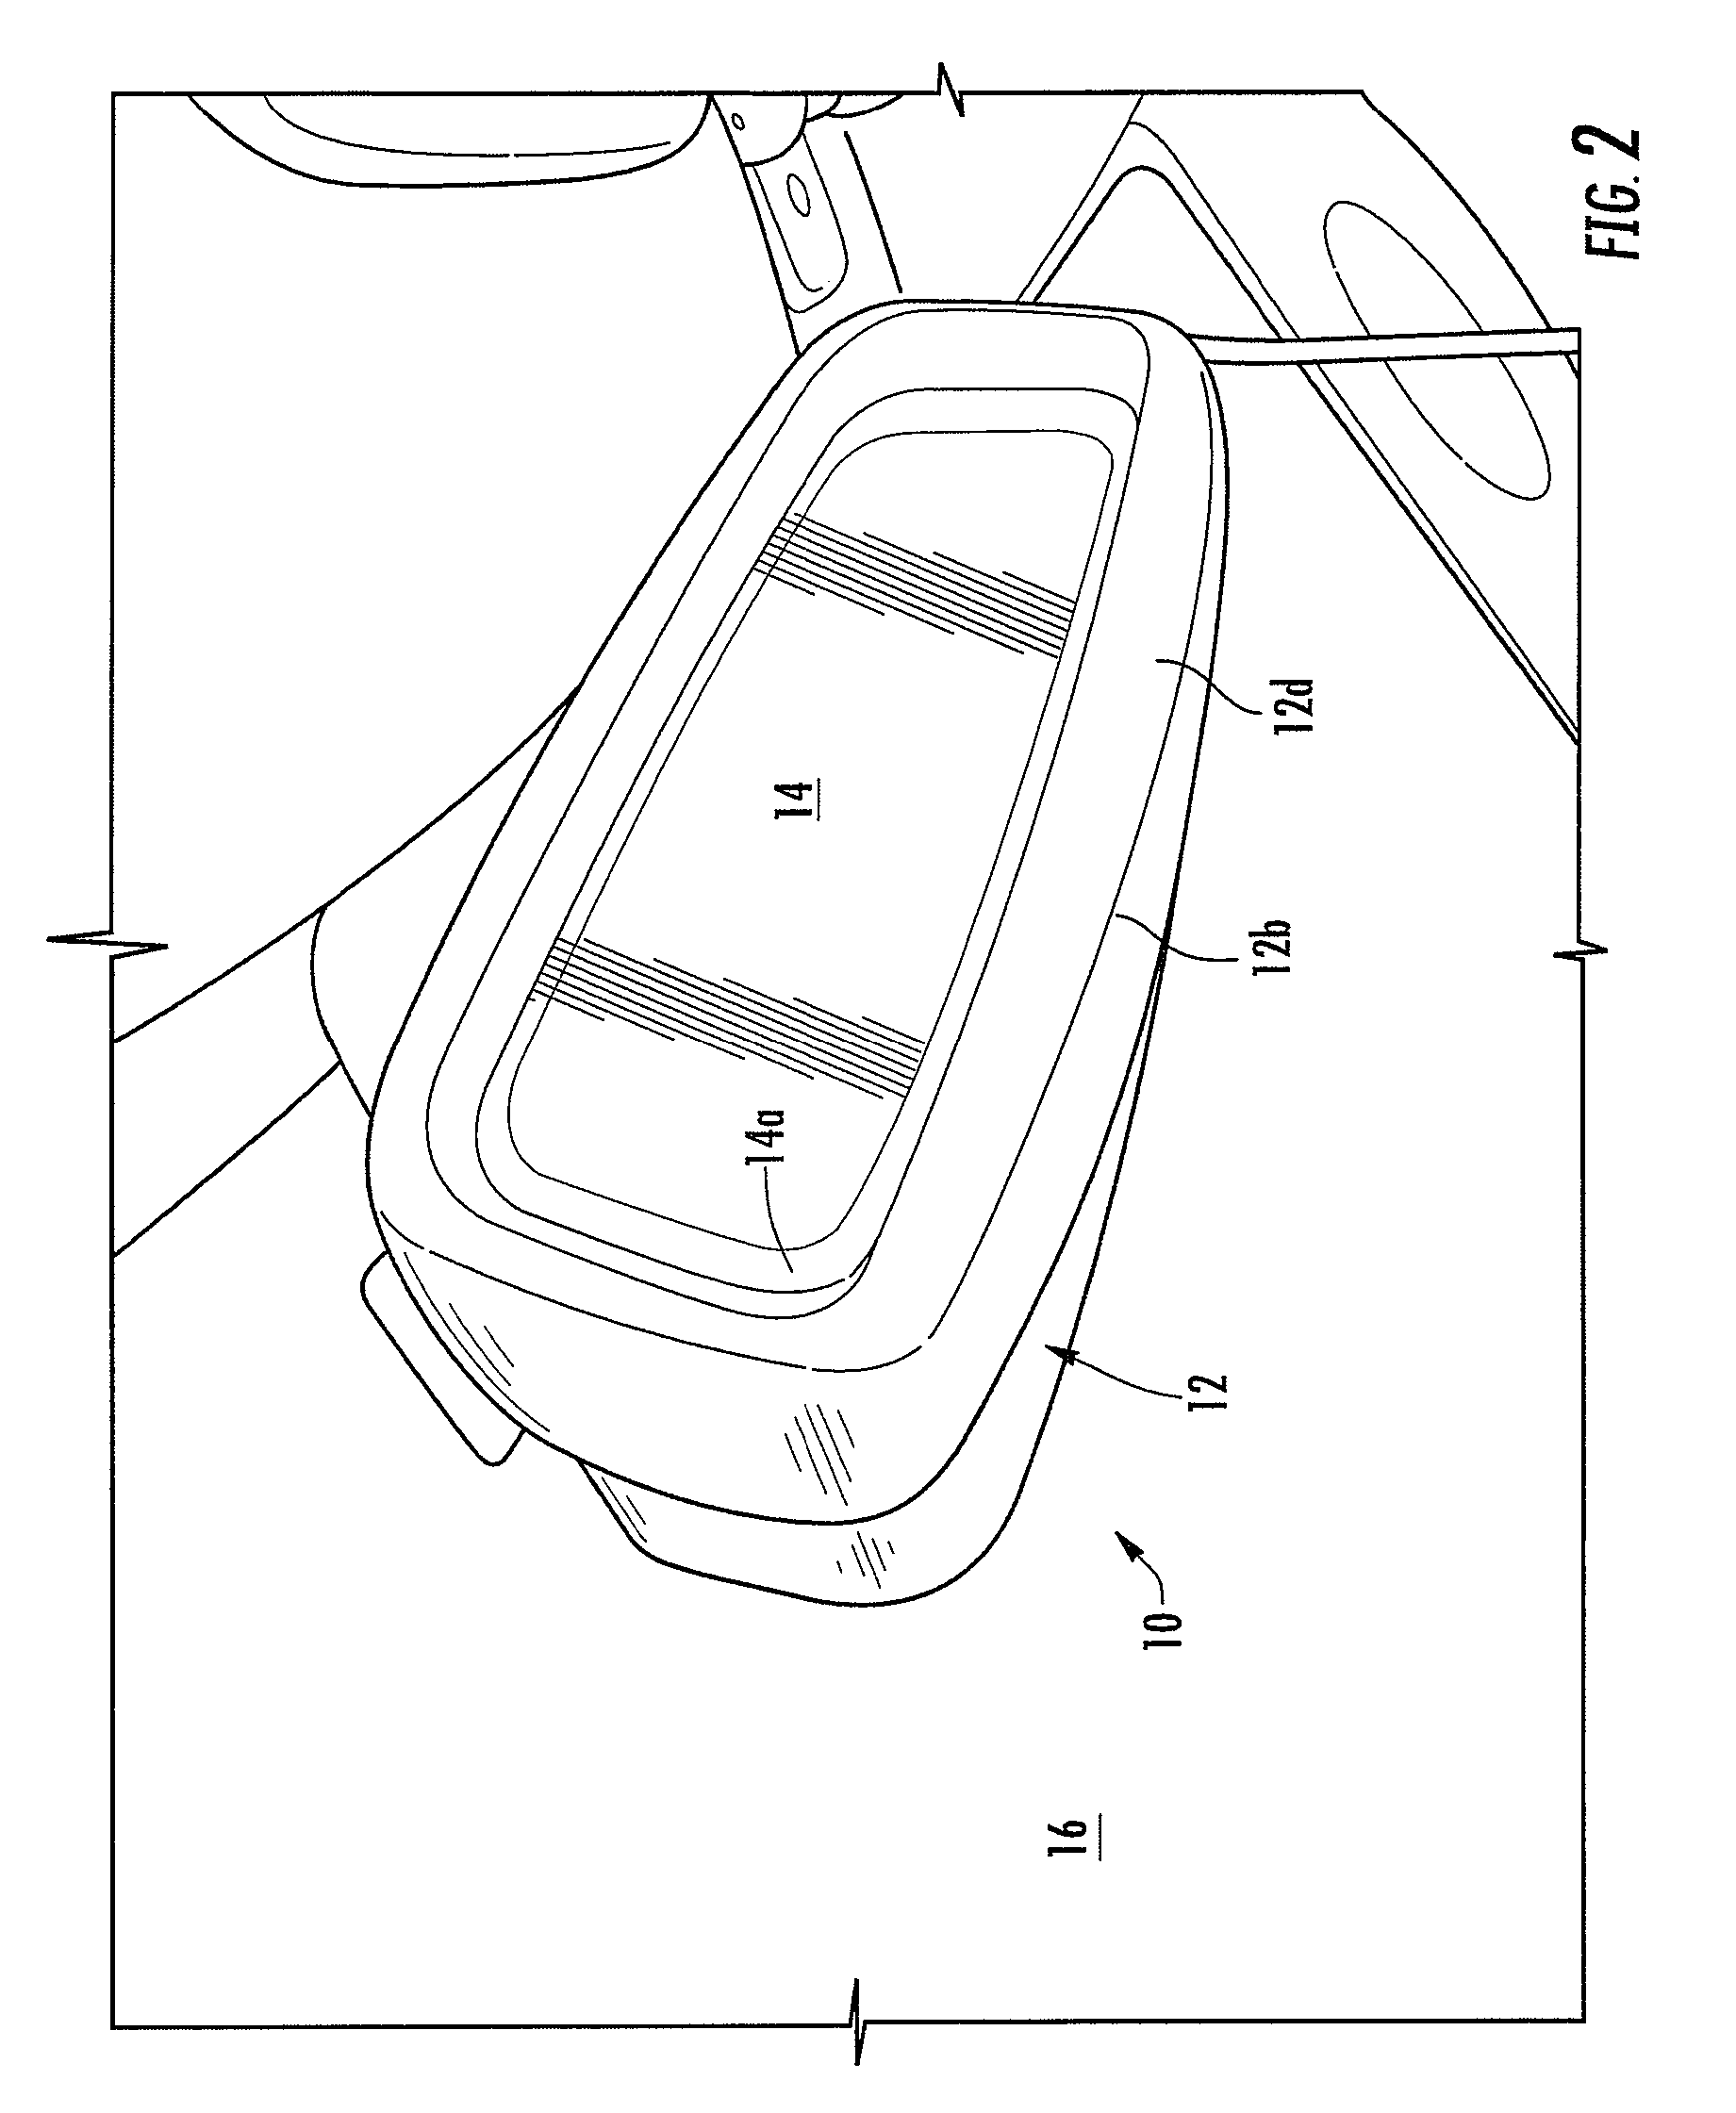 Vehicle interior rearview mirror assembly with actuator